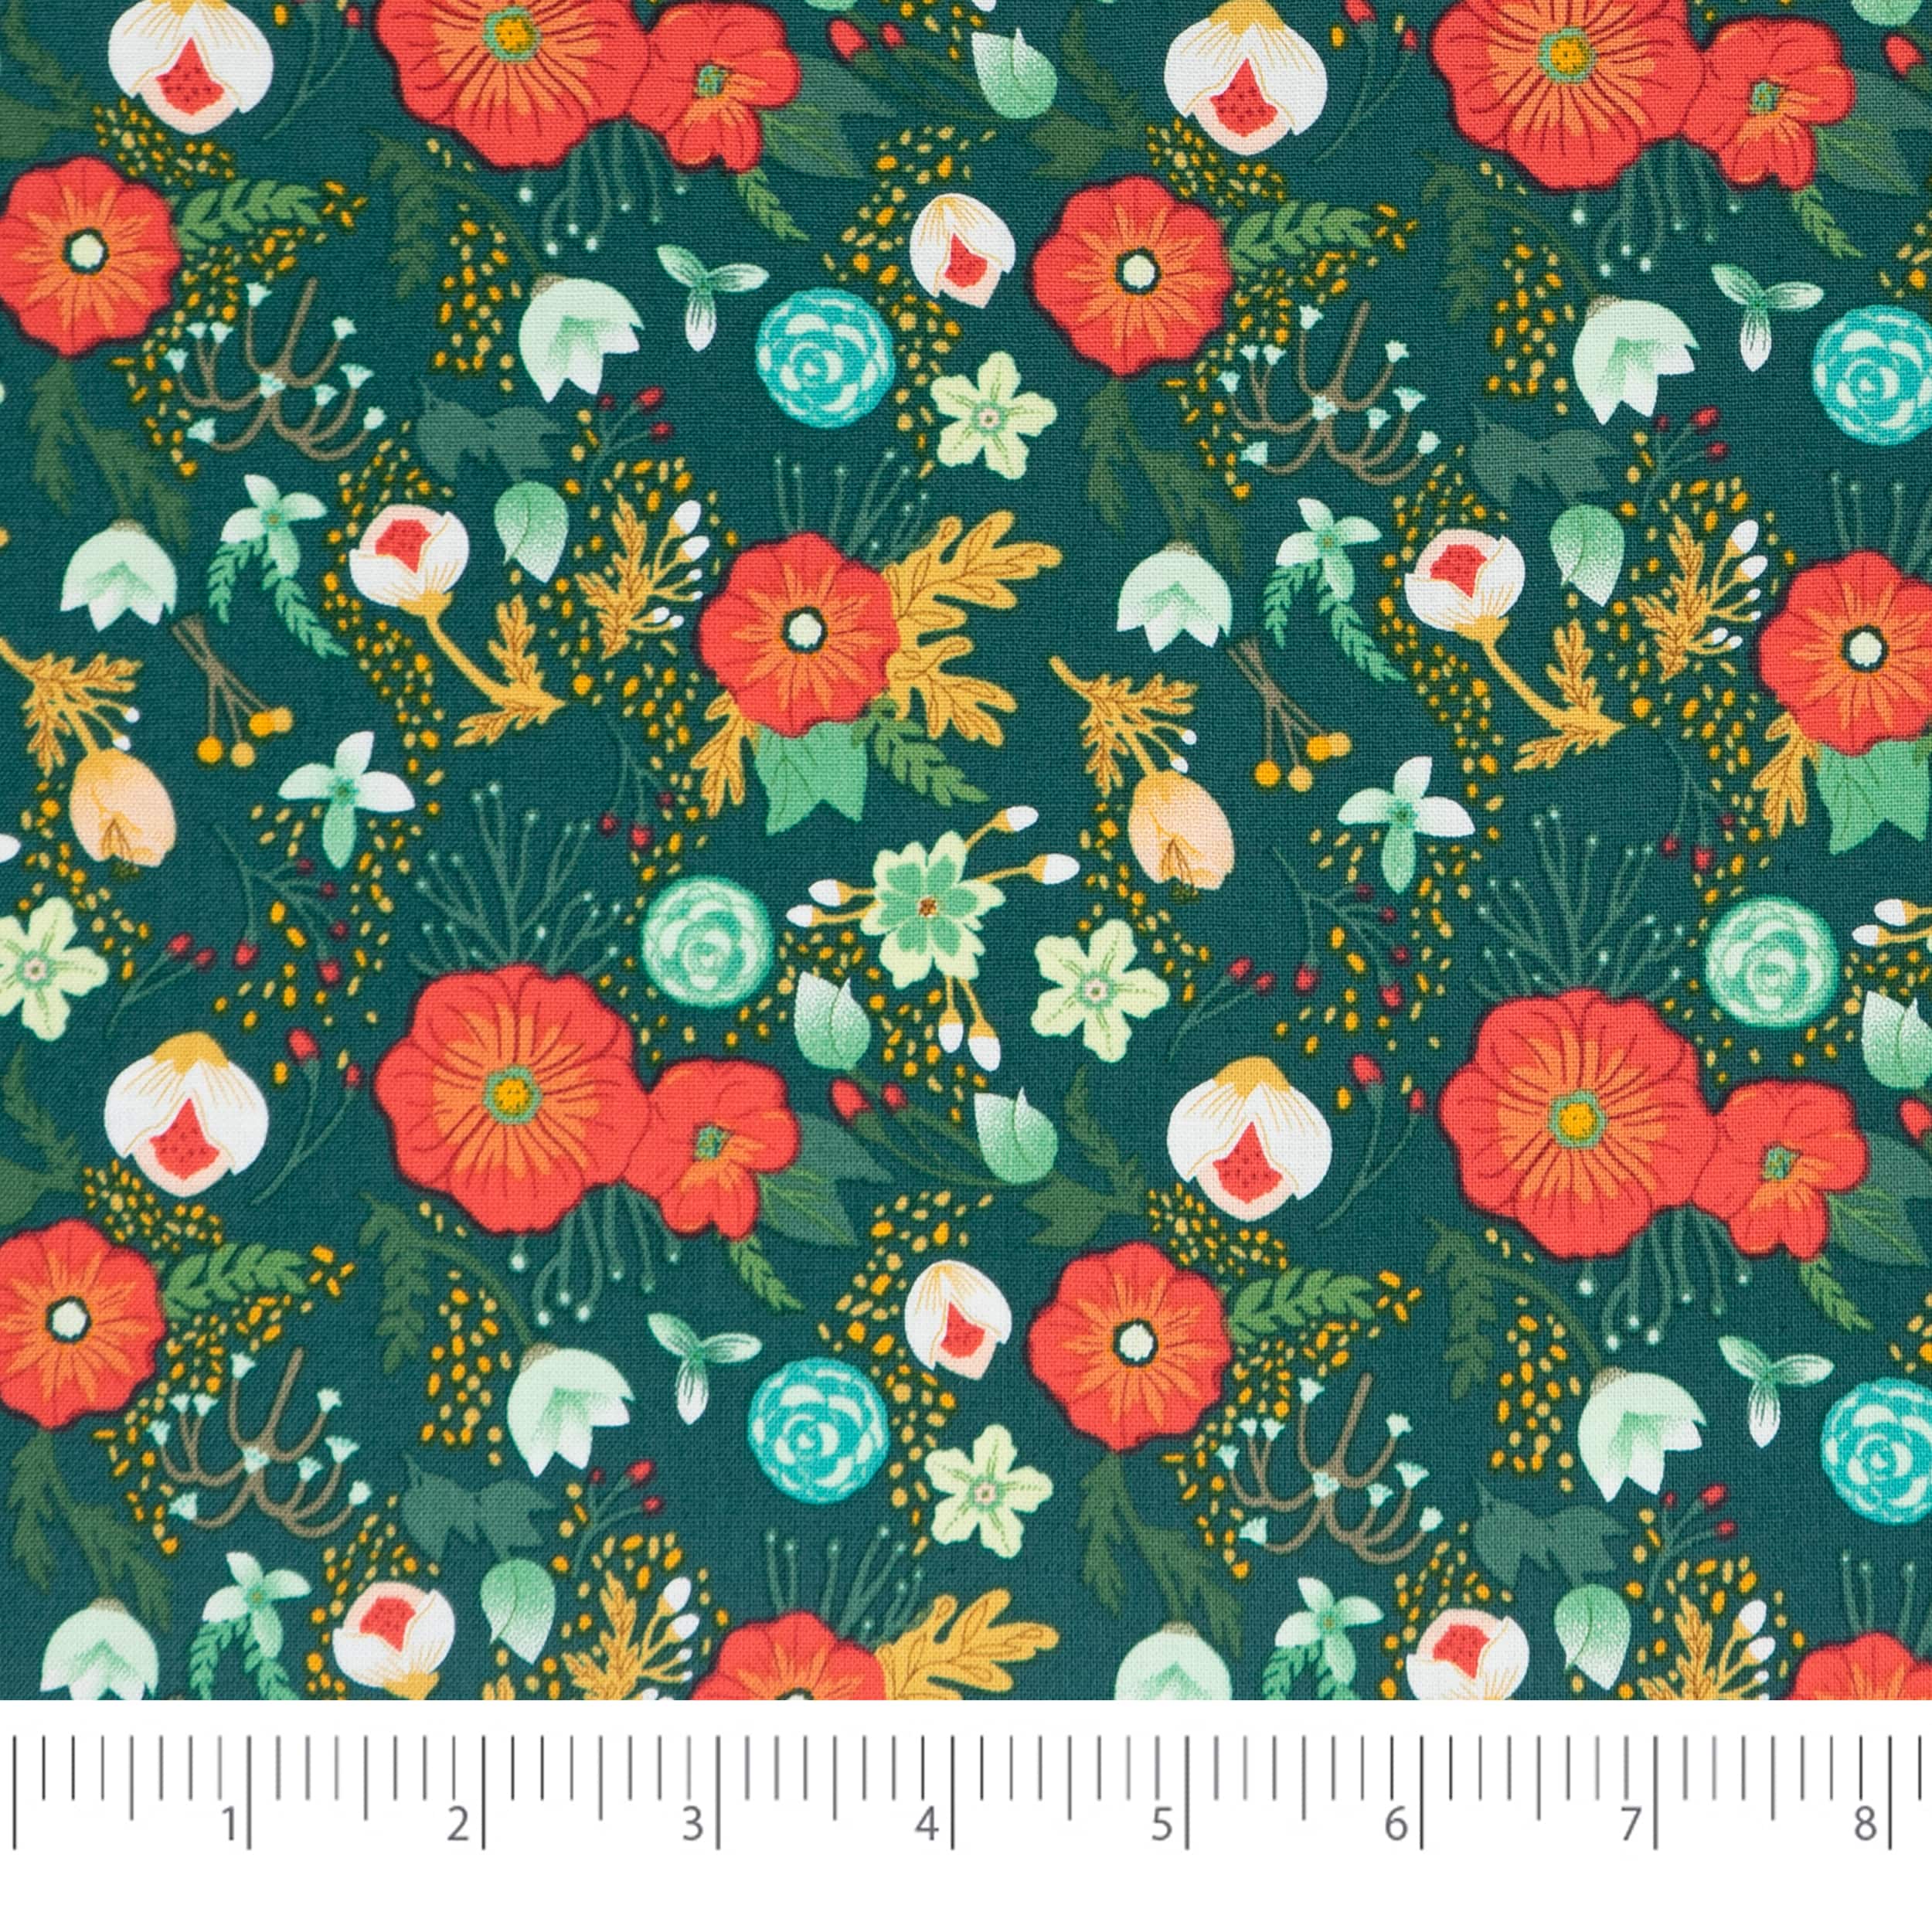 SINGER Christmas Holiday Nordic Floral Cotton Fabric